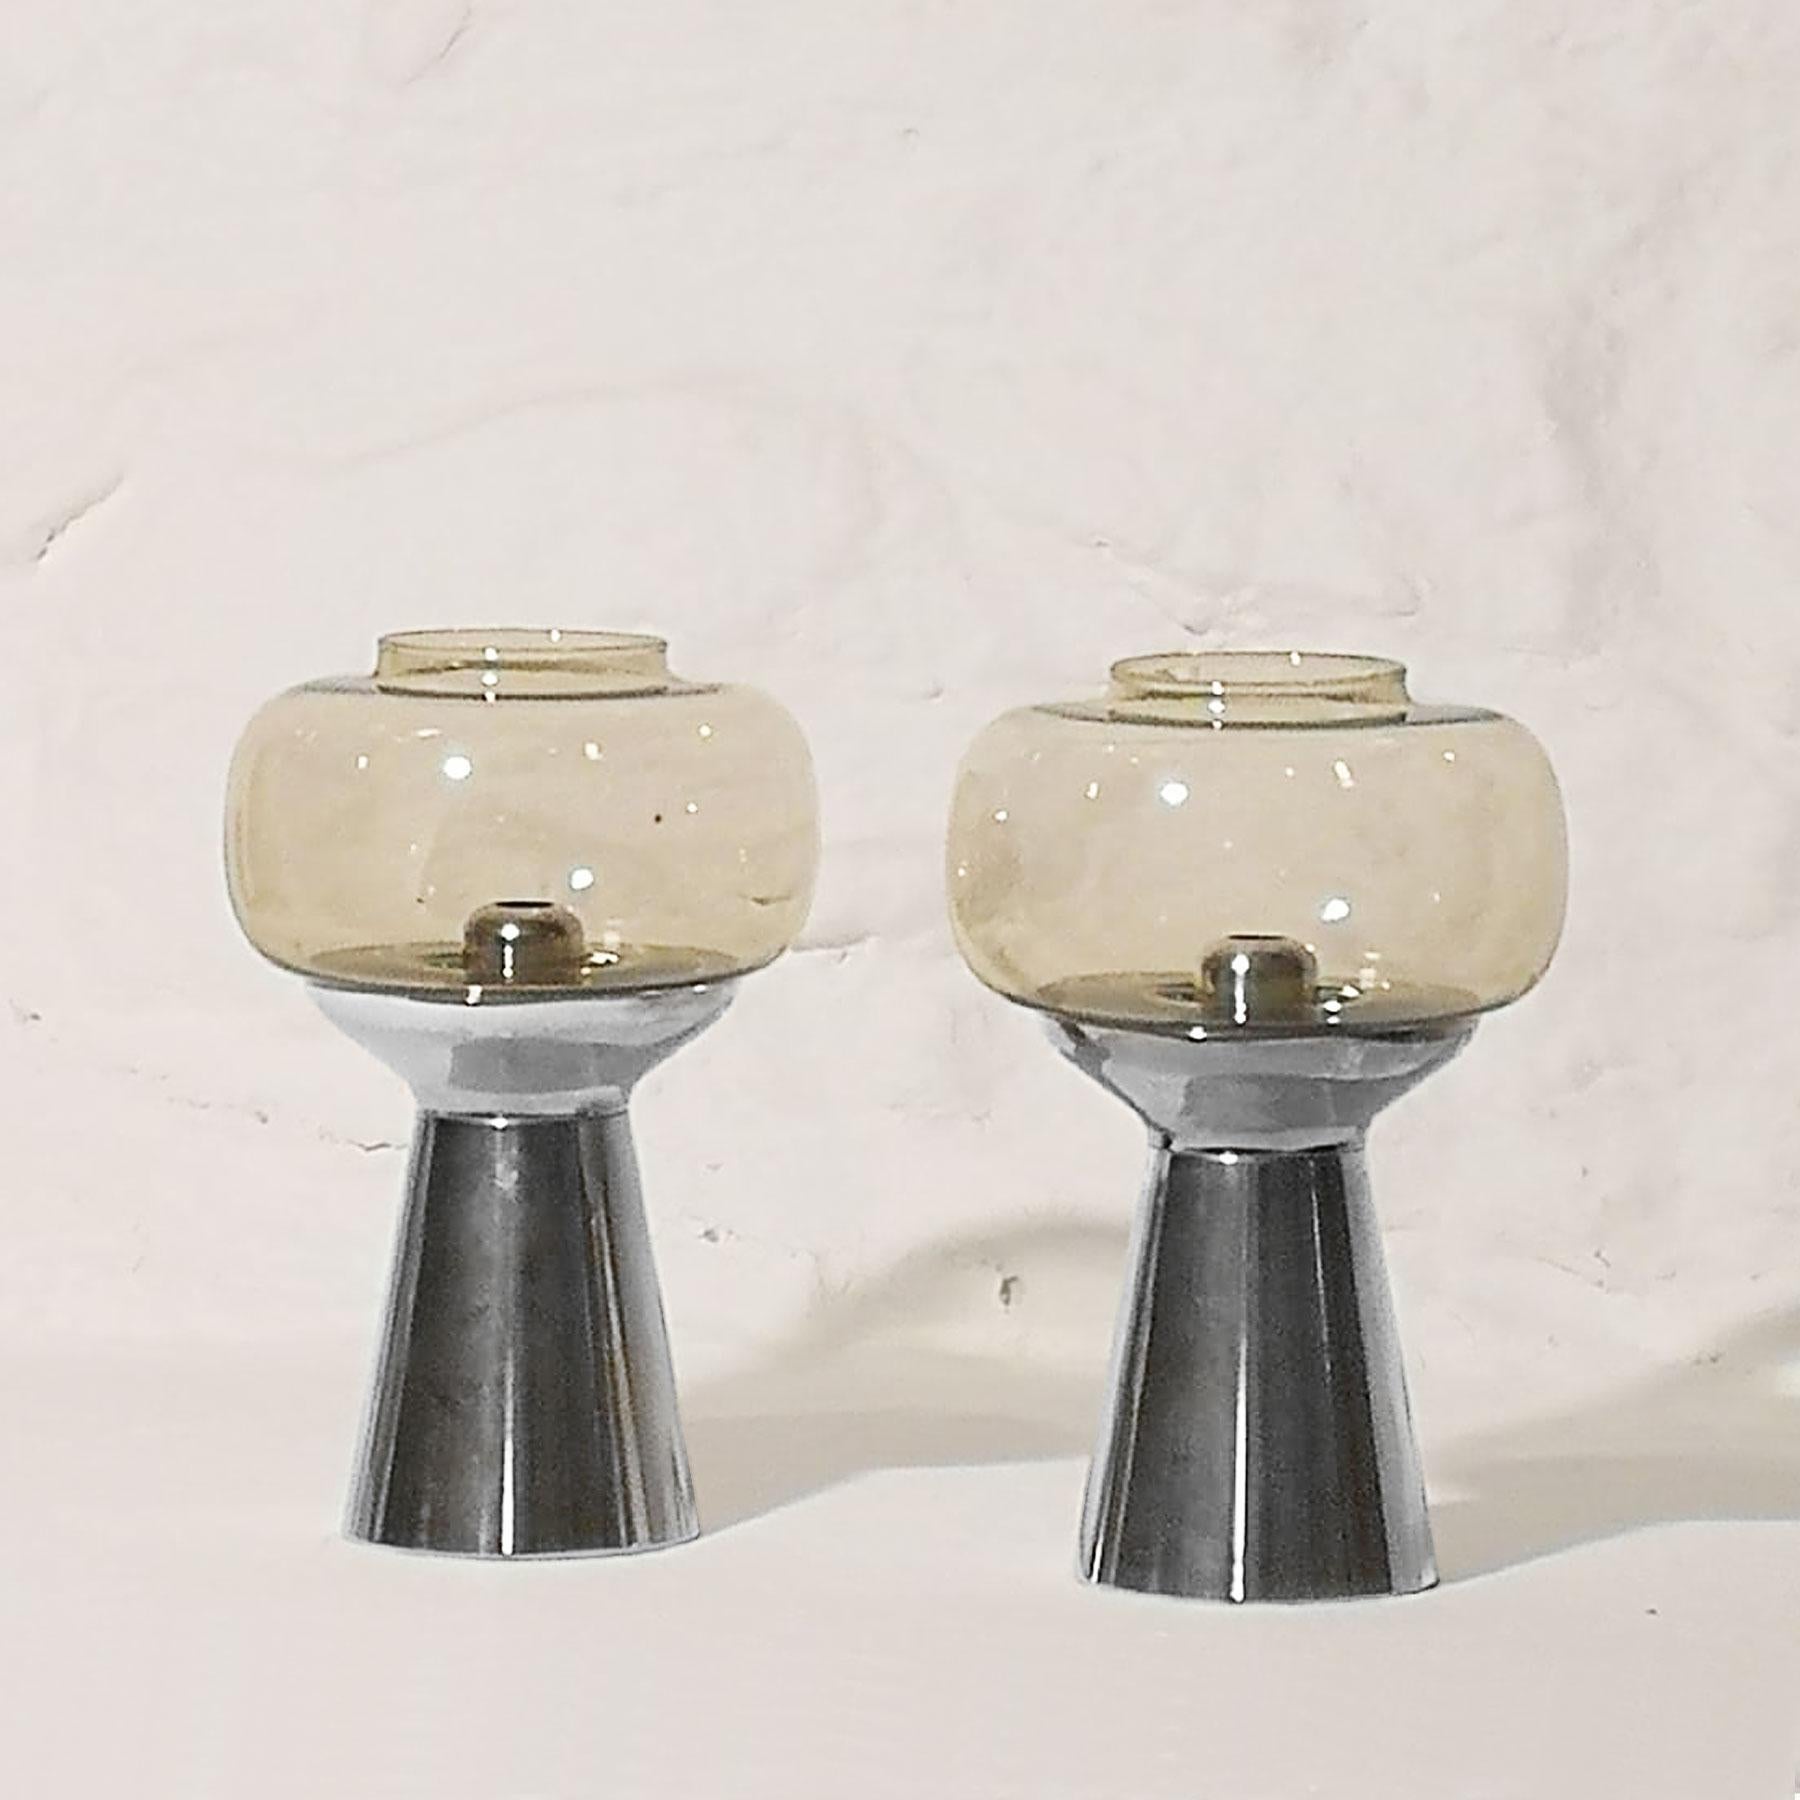 Pair of candleholders, chrome-plated metal and light smoked glass. Spring system for keeping candles at the right height.

Signed: FÖHL

Western Germany, circa 1970.